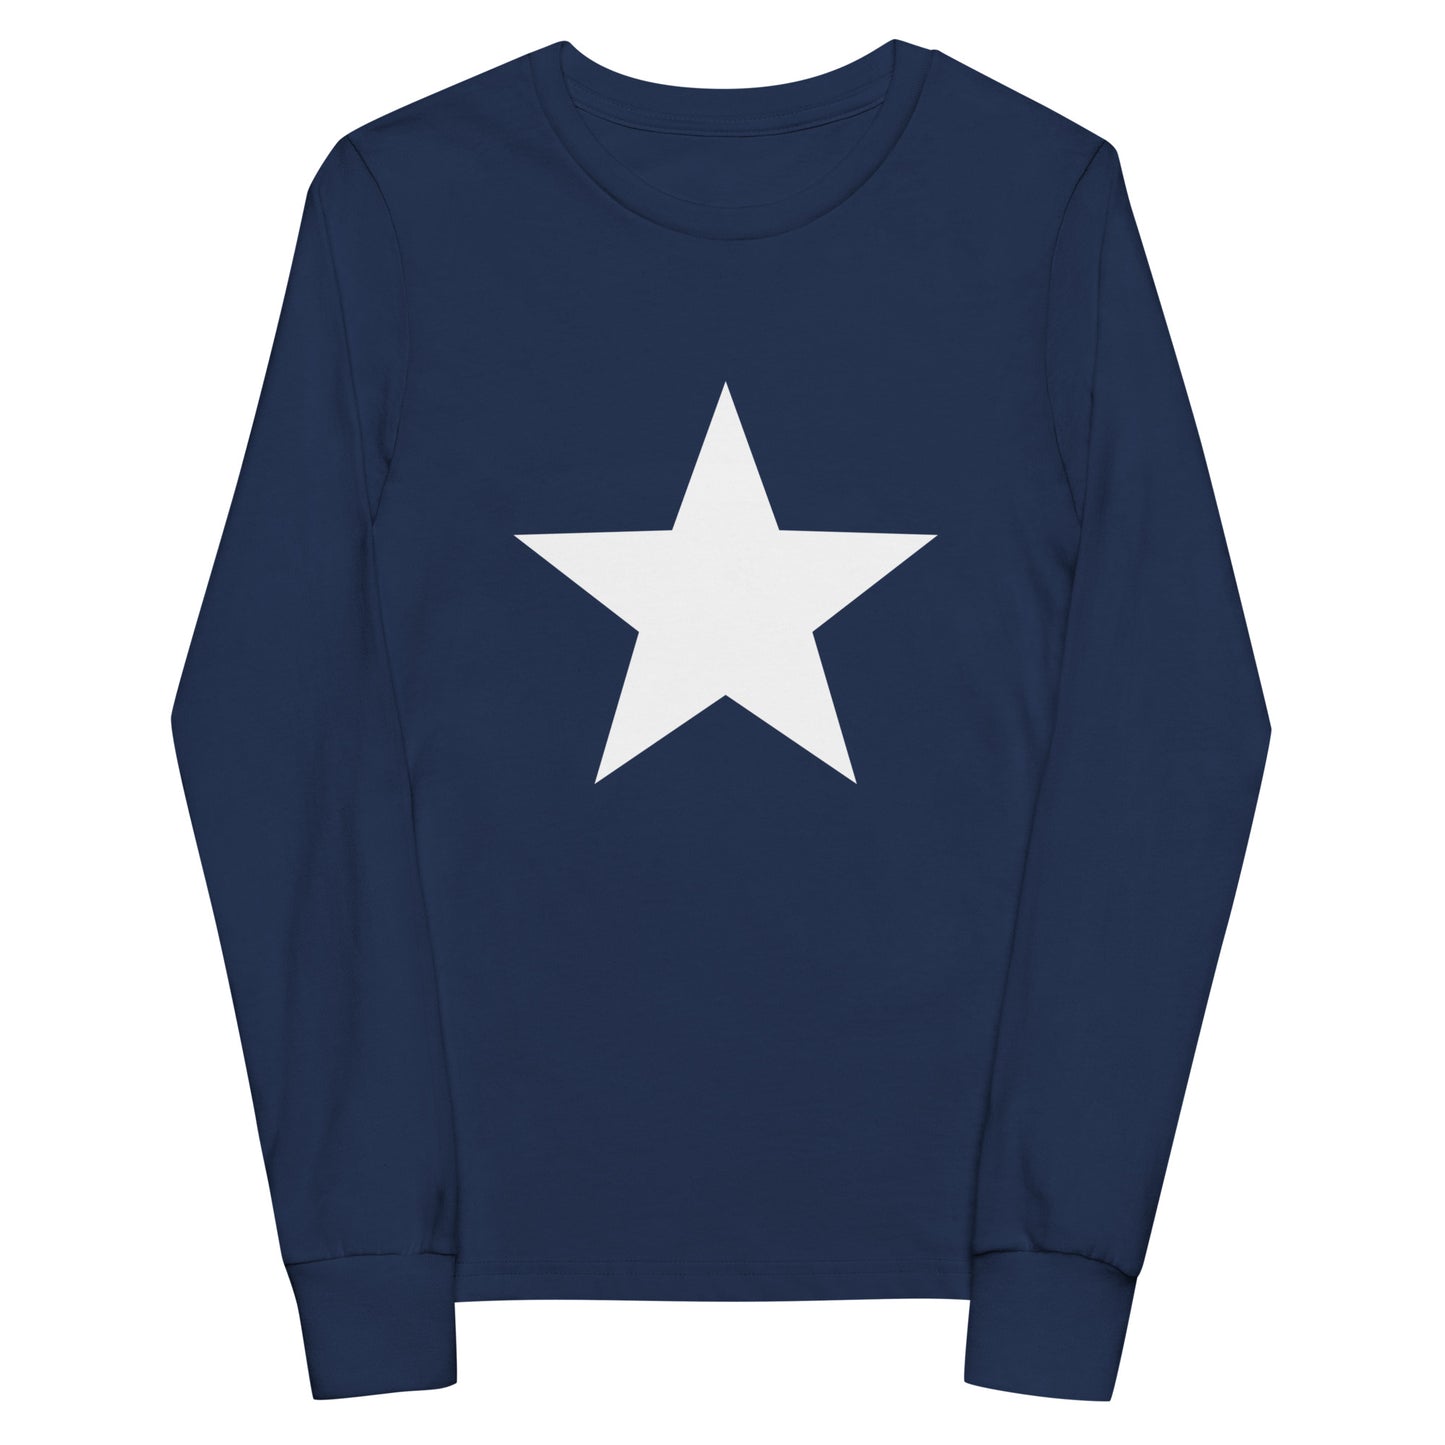 One Star - Sustainably Made Kids Long Sleeve T-shirt